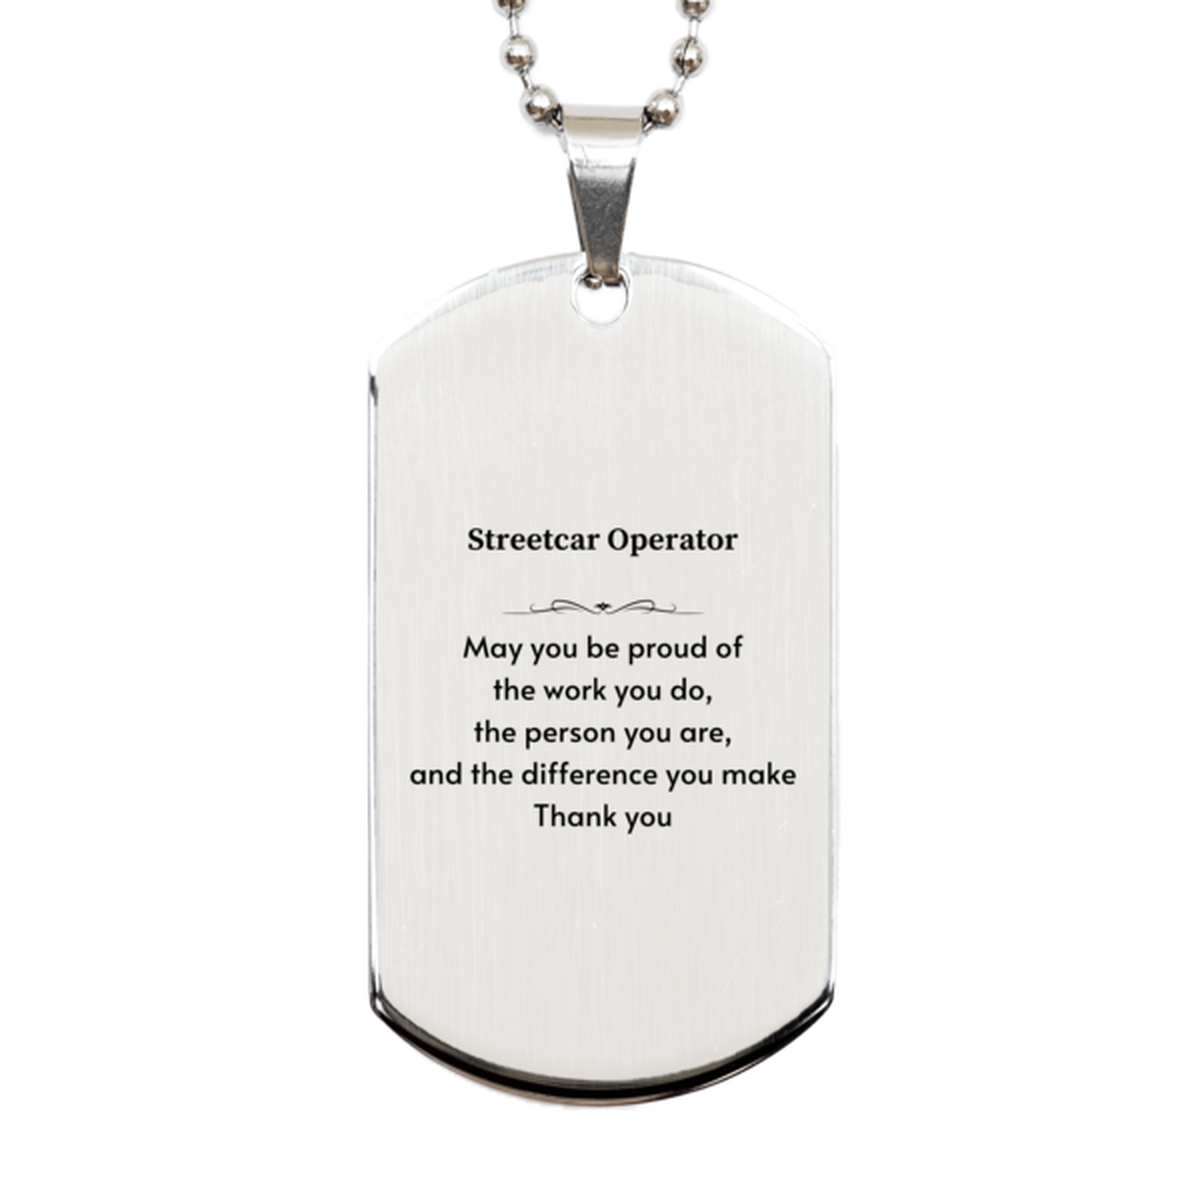 Heartwarming Silver Dog Tag Retirement Coworkers Gifts for Streetcar Operator, Streetcar Operator May You be proud of the work you do, the person you are Gifts for Boss Men Women Friends